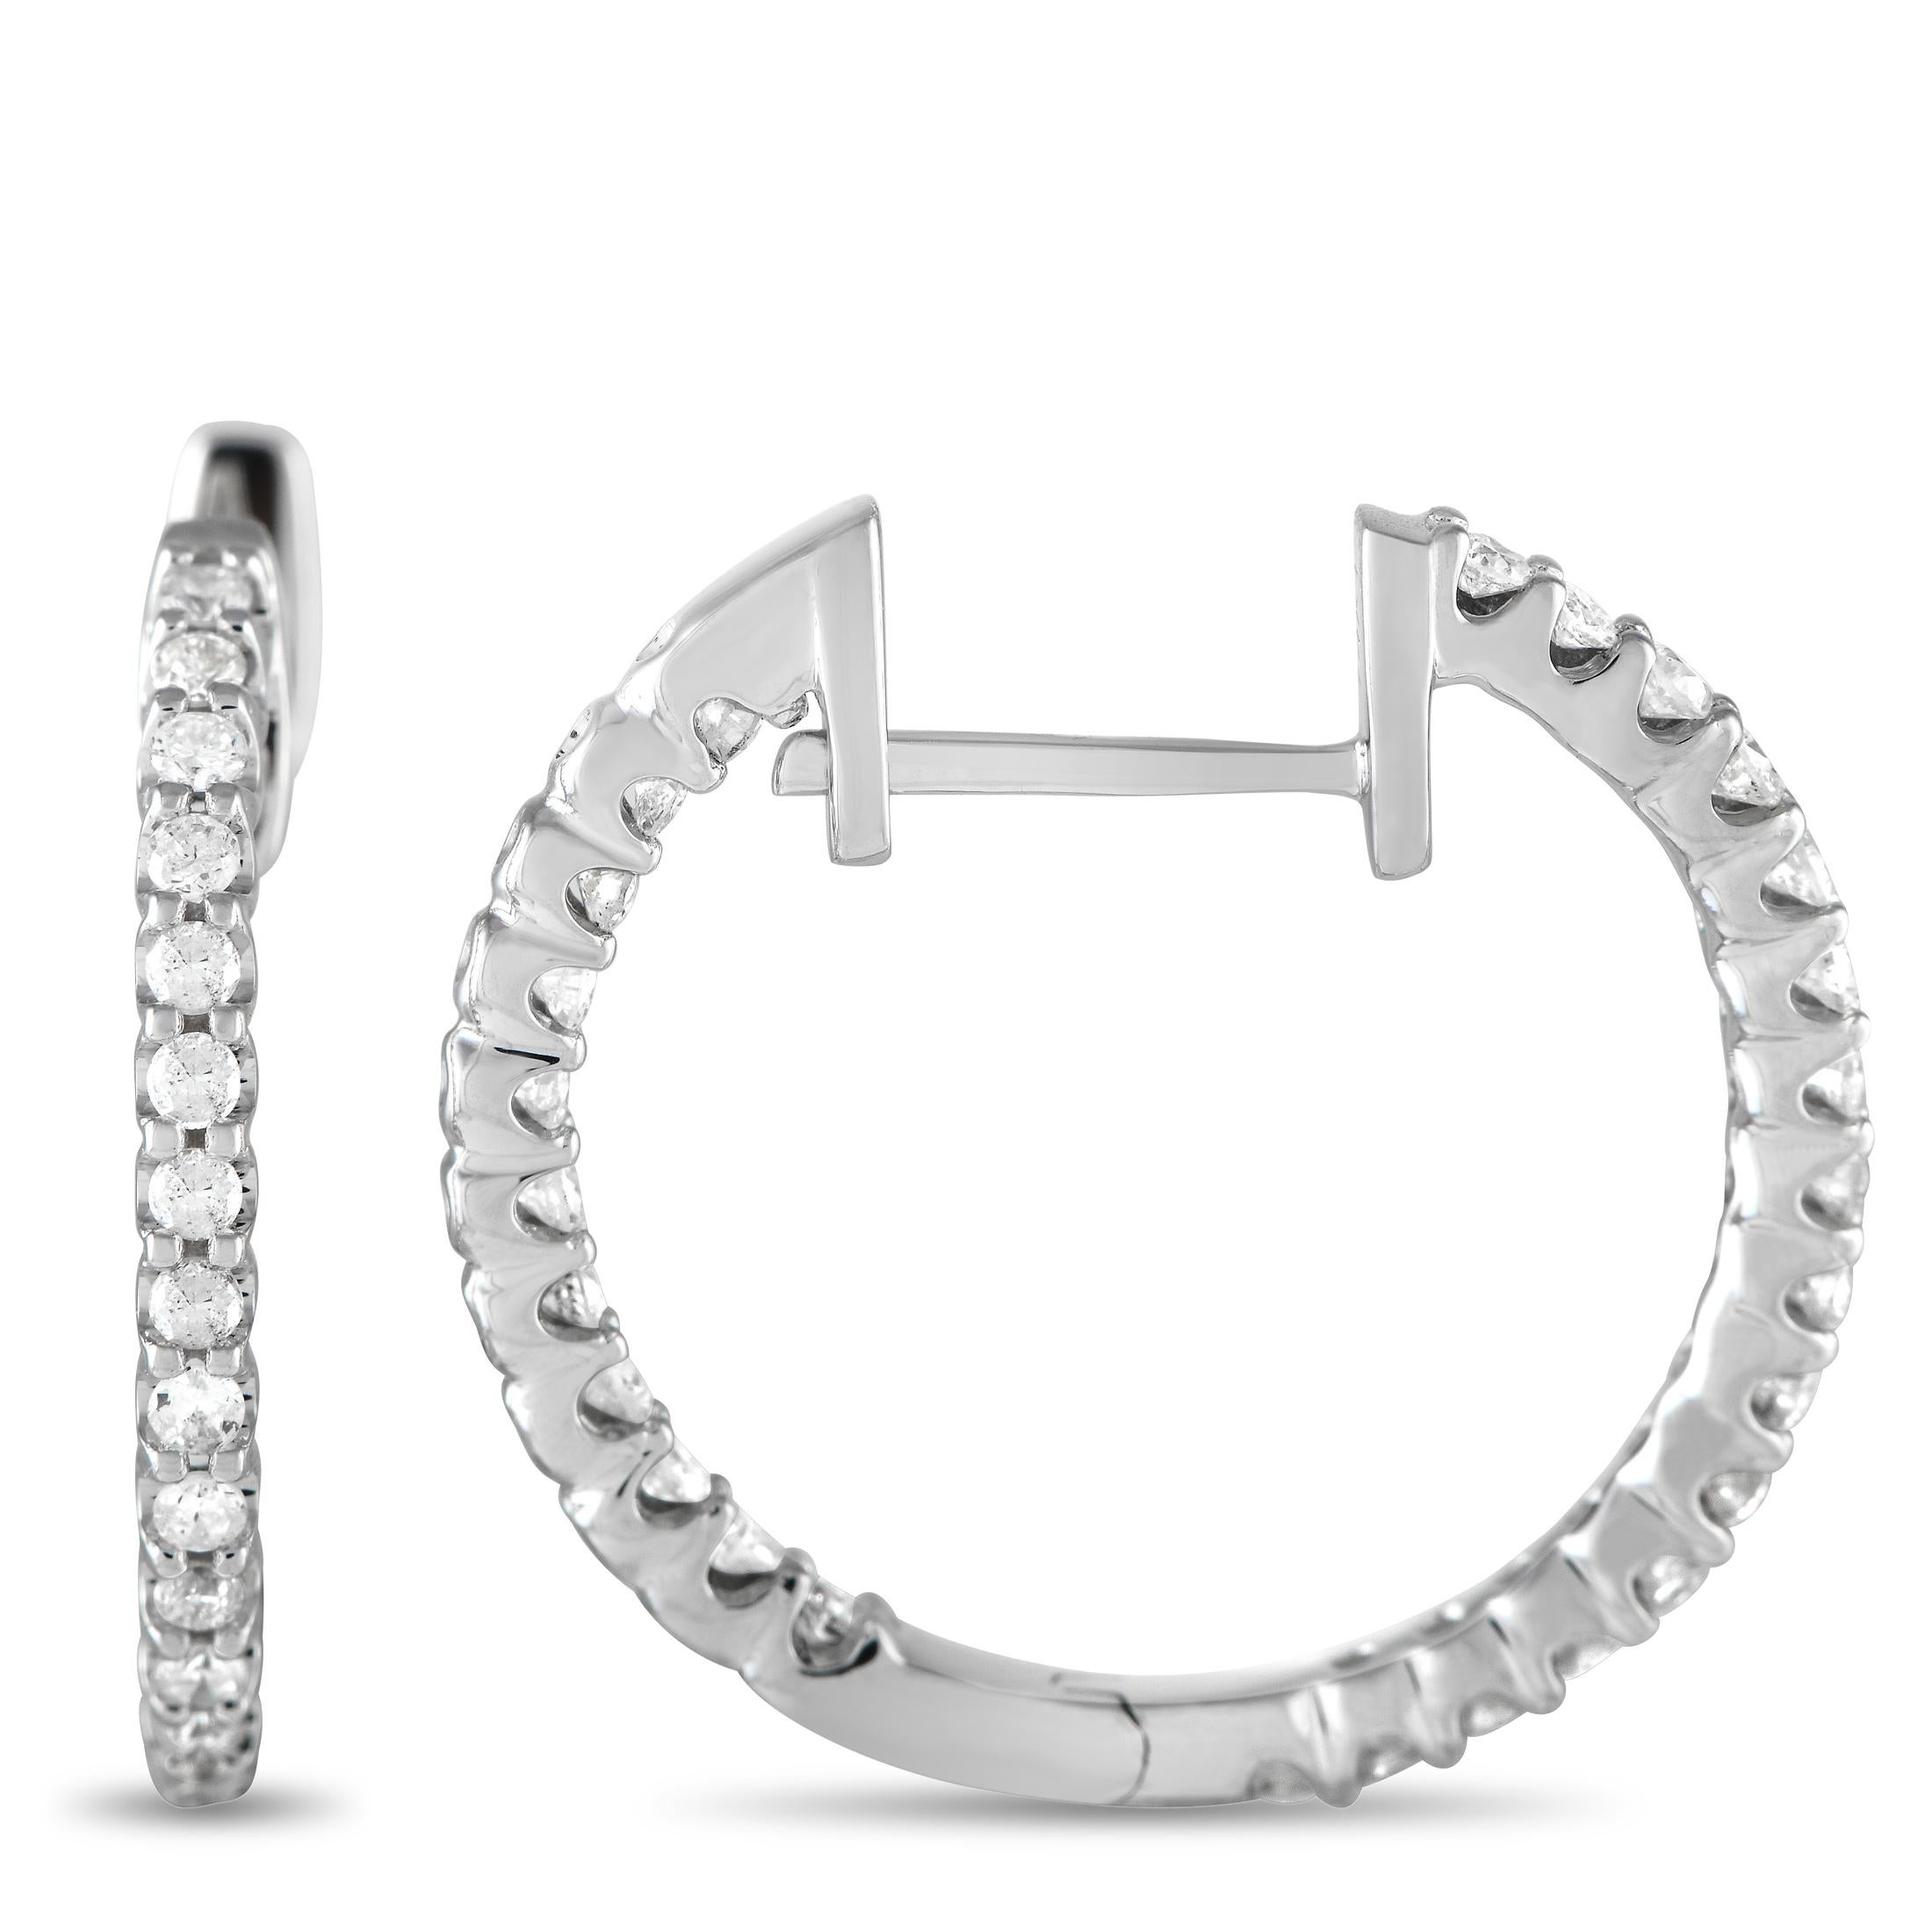 Round Cut Lb Exclusive 14k White Gold 0.42 Carat Diamond Inside-Out Hoop Earrings For Sale